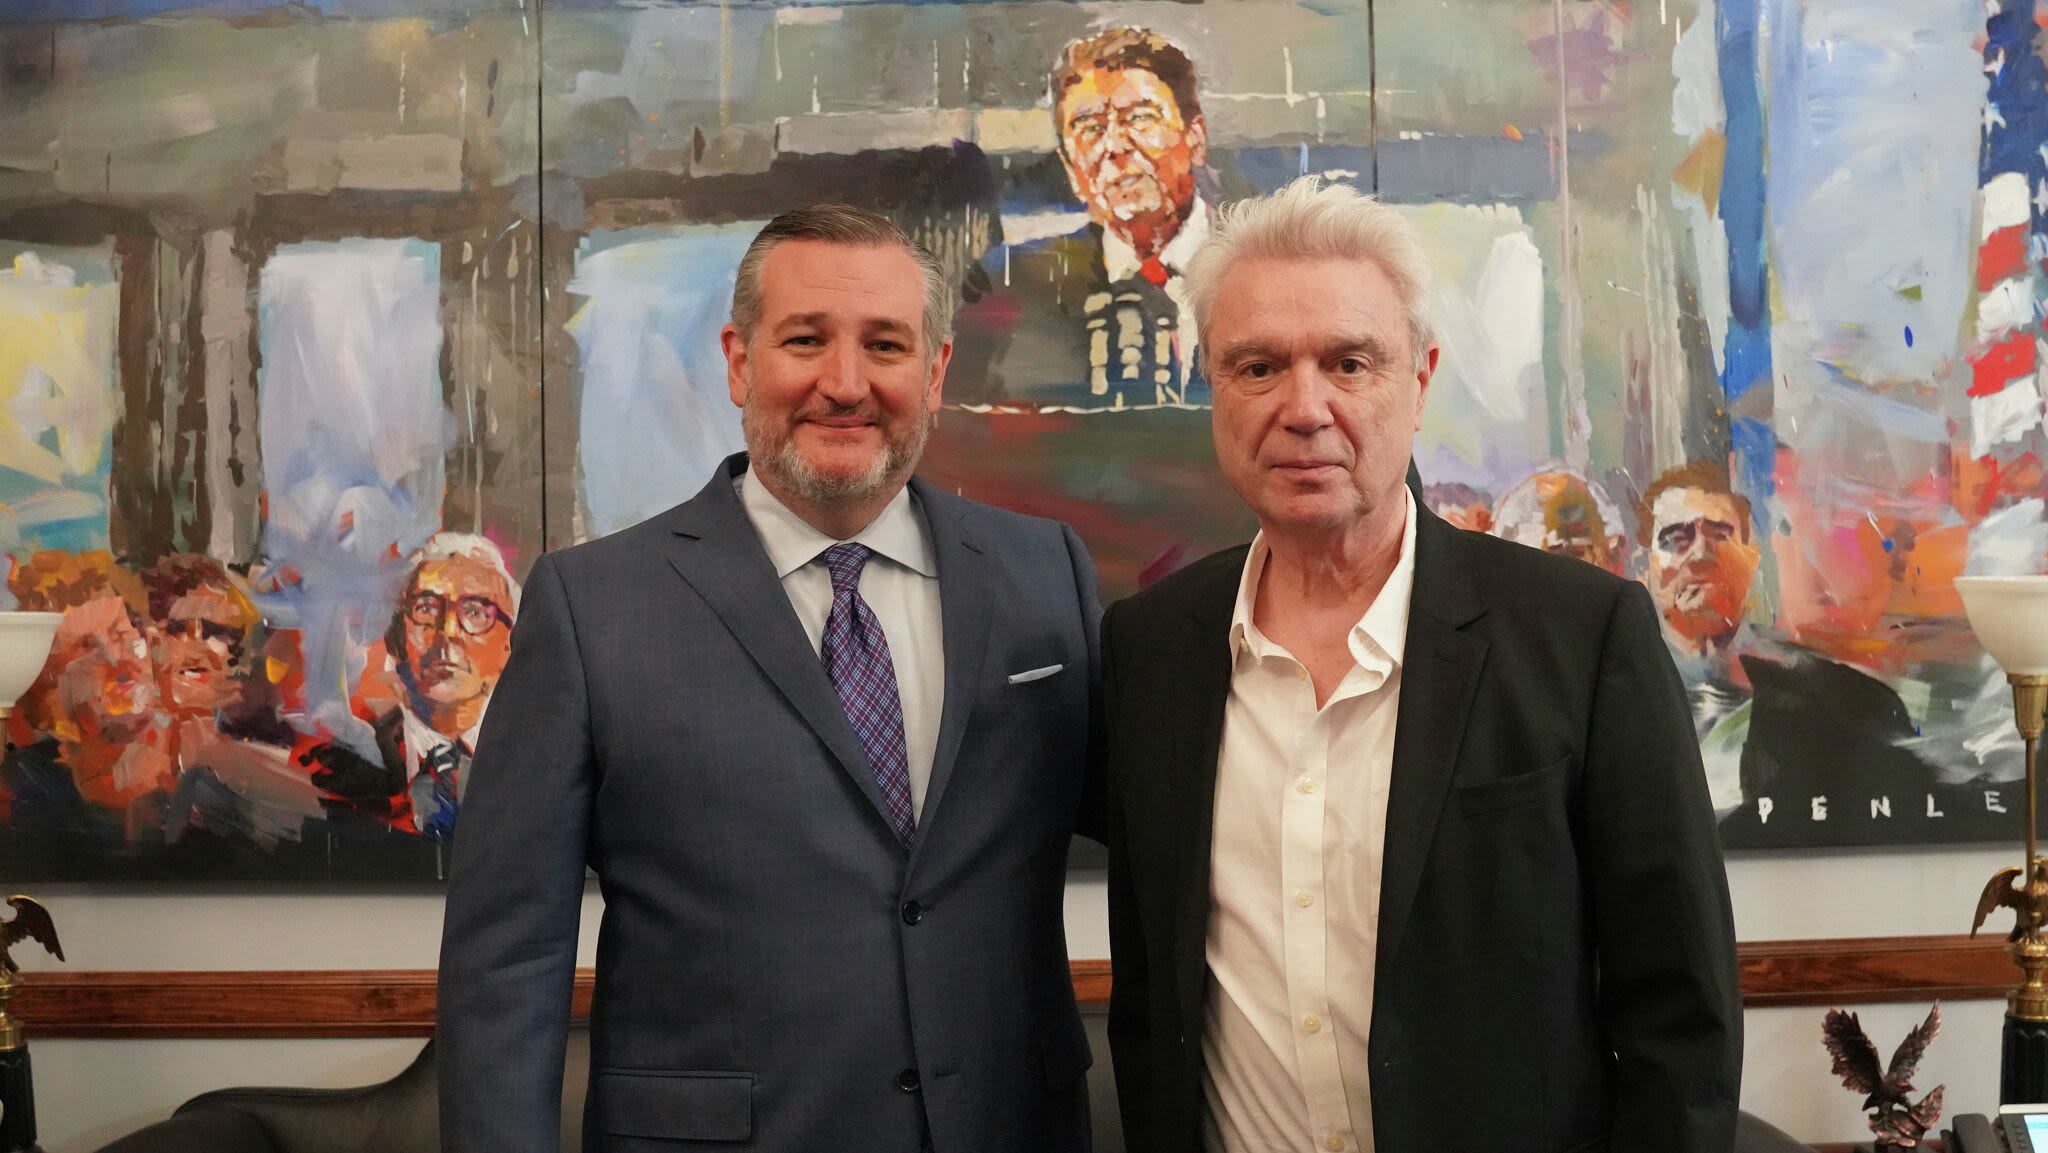 What are Ted Cruz and David Byrne doing in this photo together?